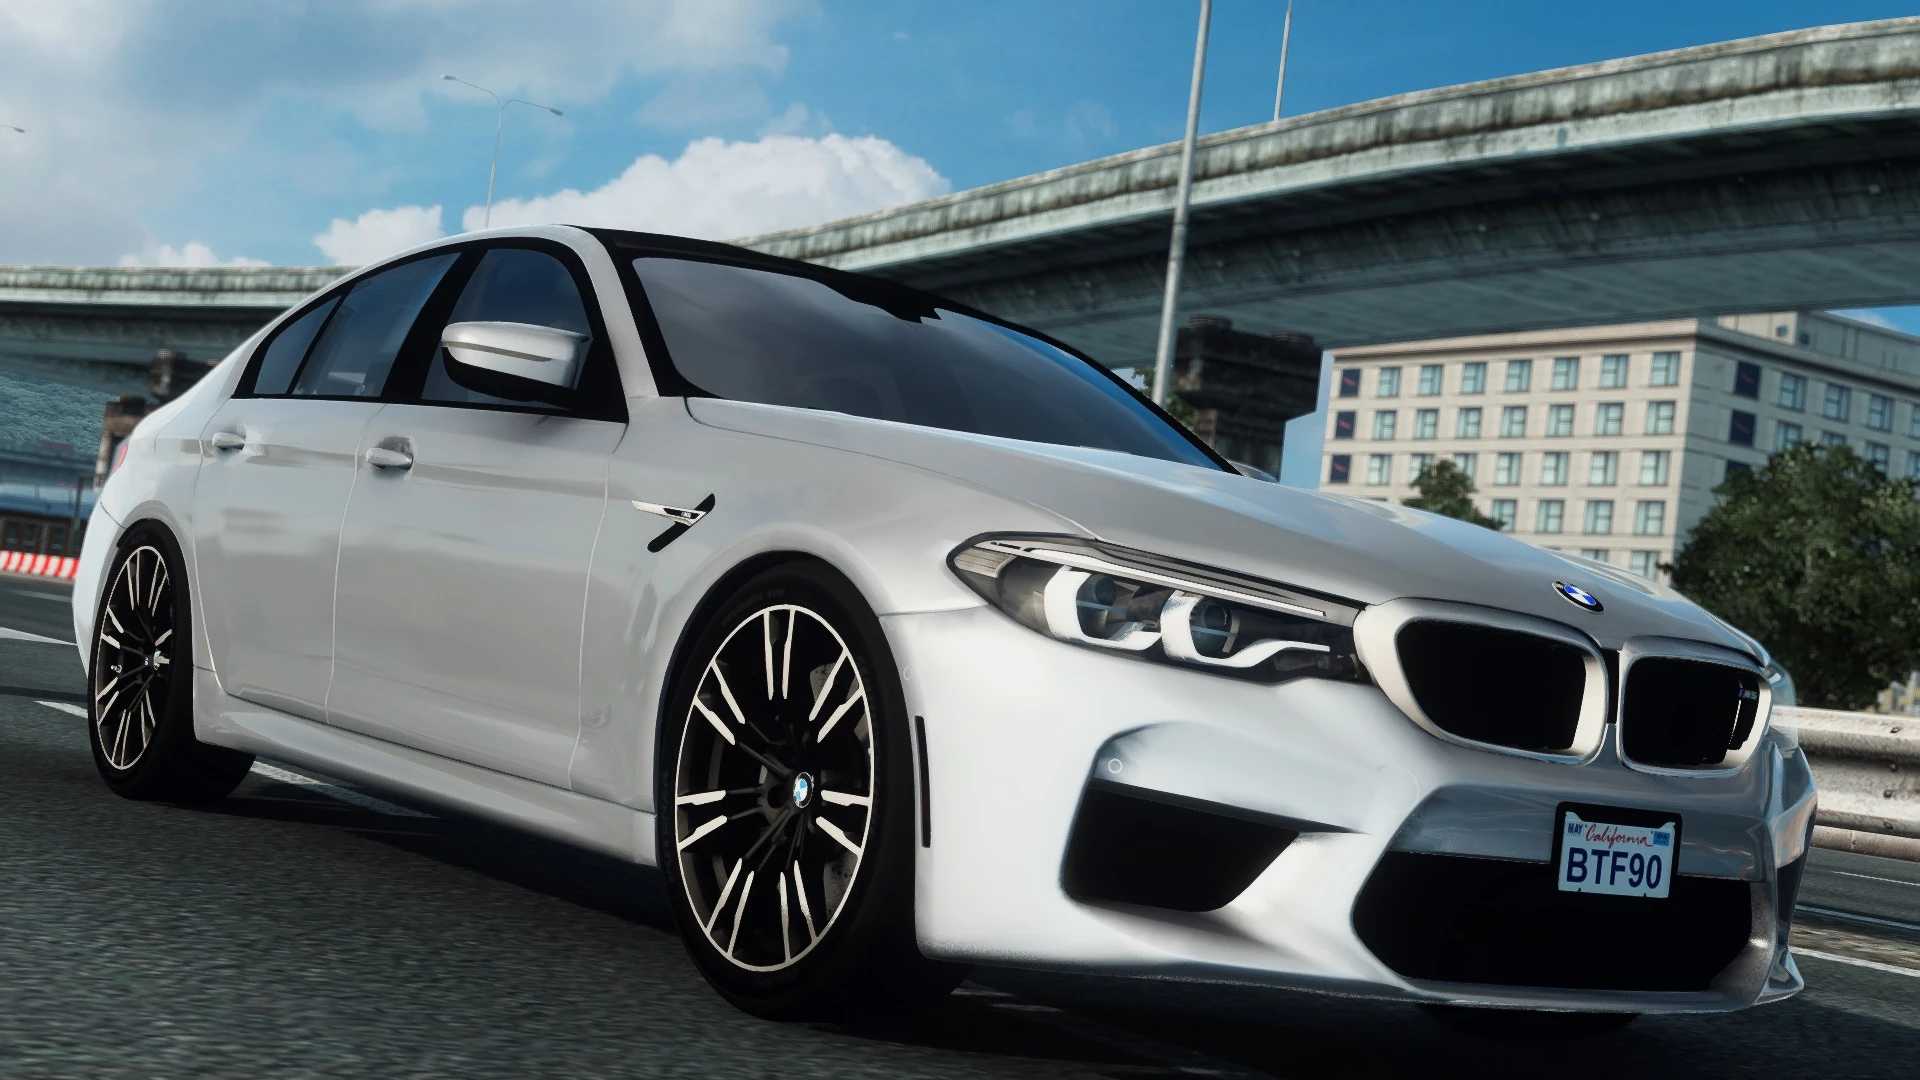 Бмв м5 етс 2 1.49. BMW m5 f90. BMW m5 f90 ETS 2. M5 f90. BMW m5 f90 Competition.